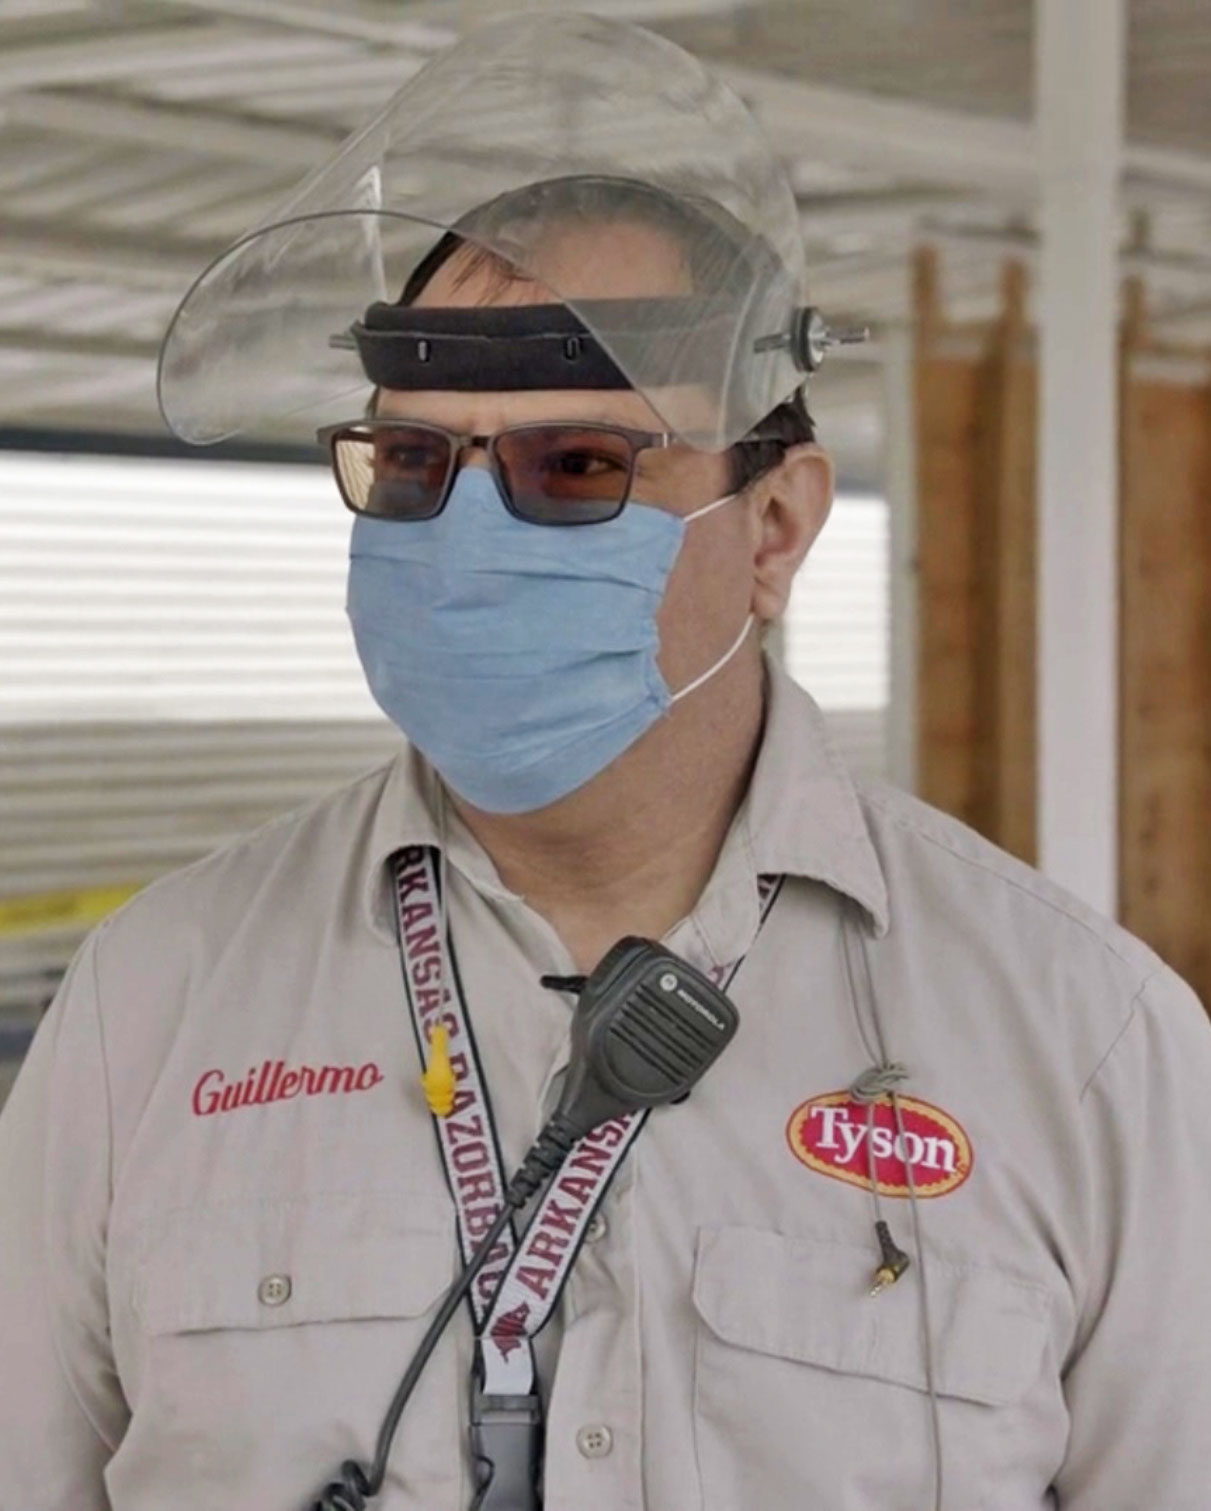 This is an image of a team member named Guillermo.